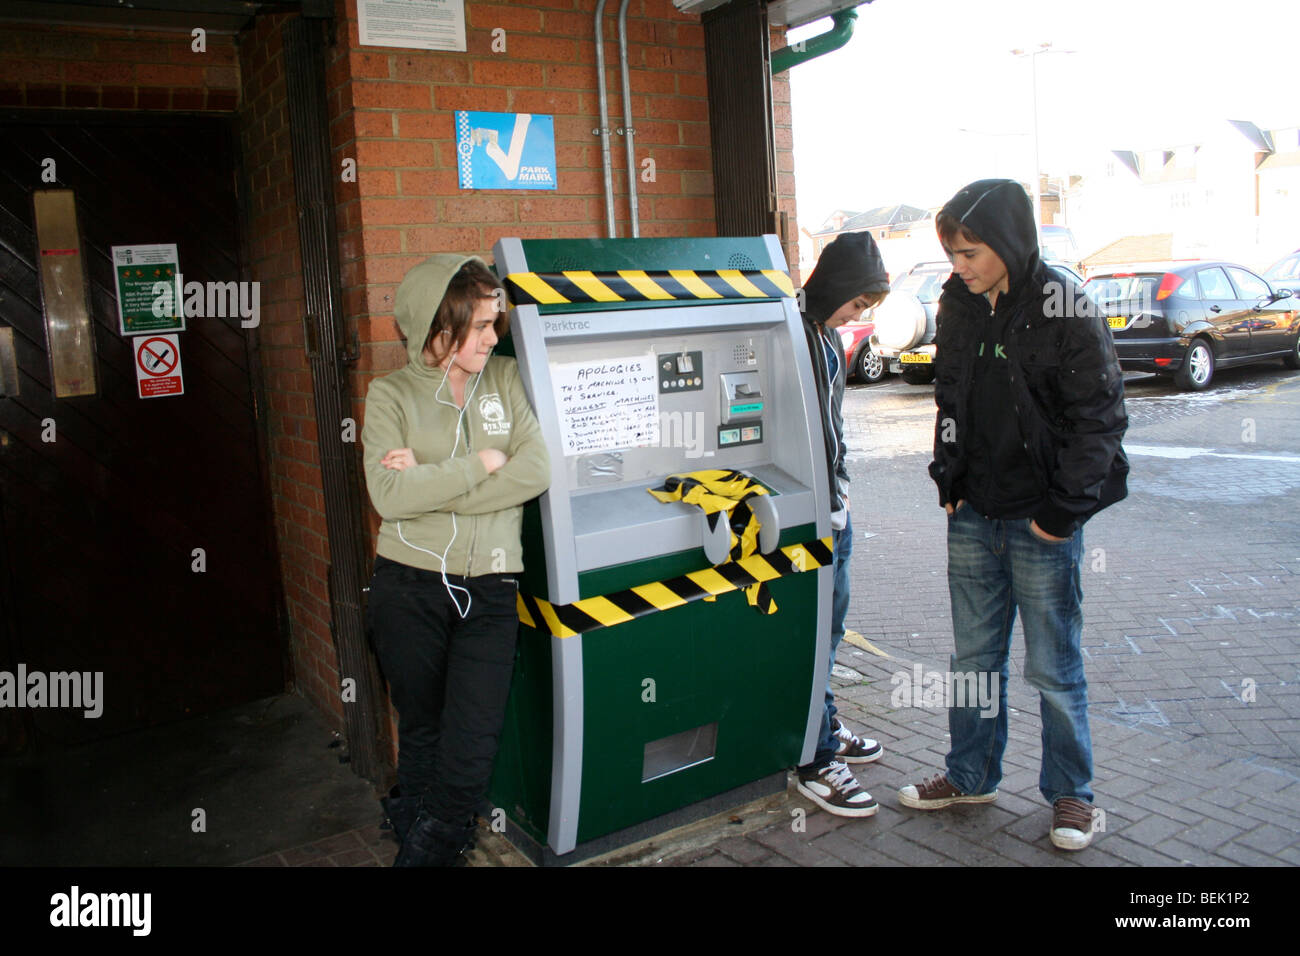 kids looking at out of order parking machine Stock Photo